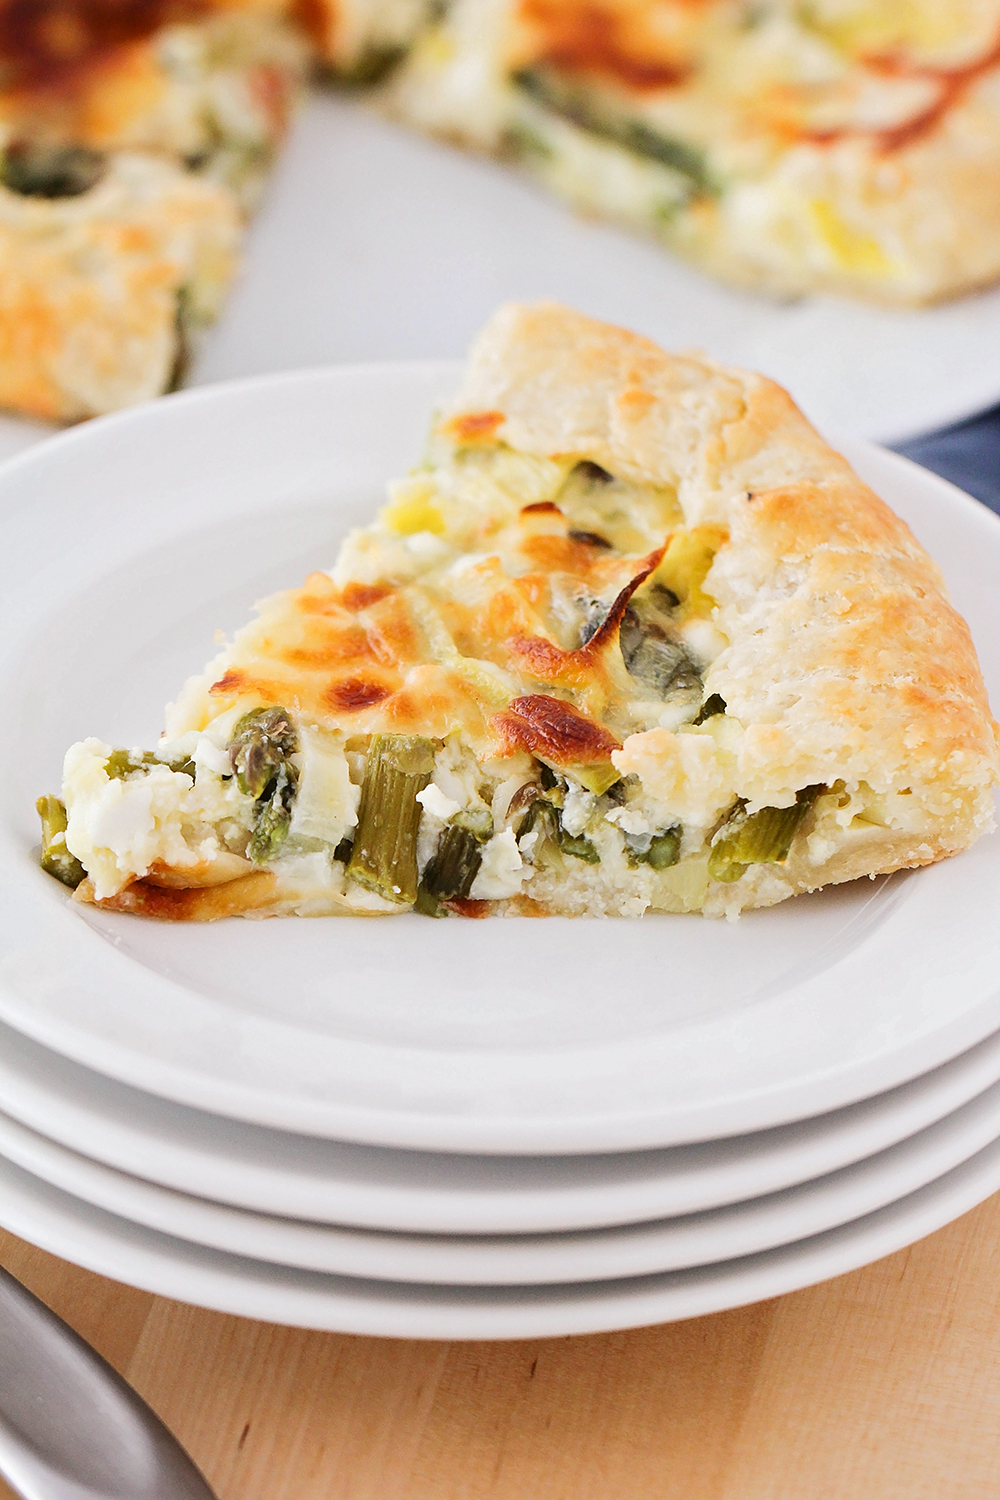 This leek and asparagus galette has a tender pastry shell filled with cheese and vegetables. So easy and so delicious!